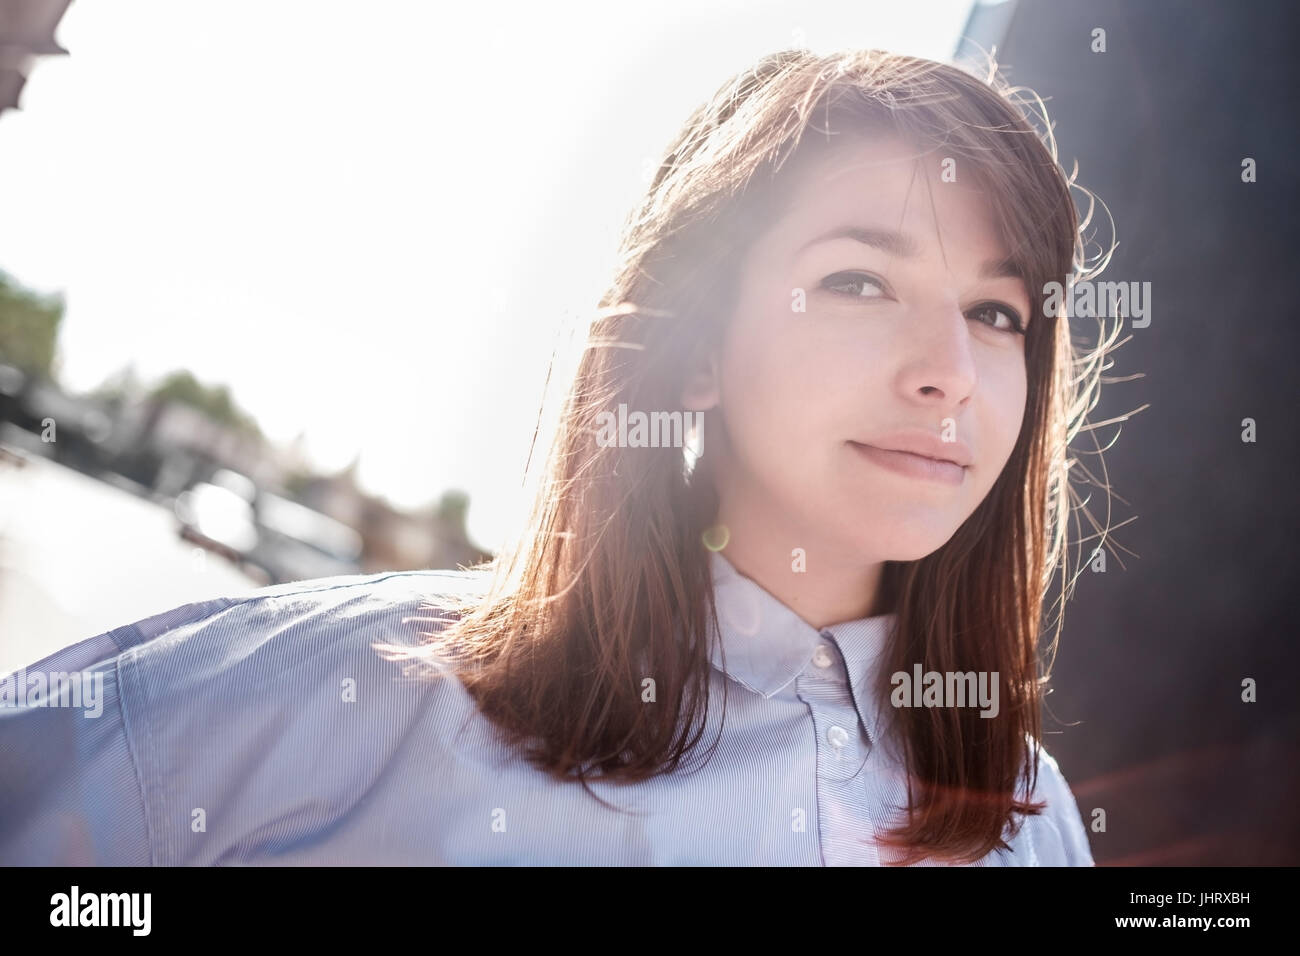 Beautiful woman portrait outdoors with back light. Stock Photo